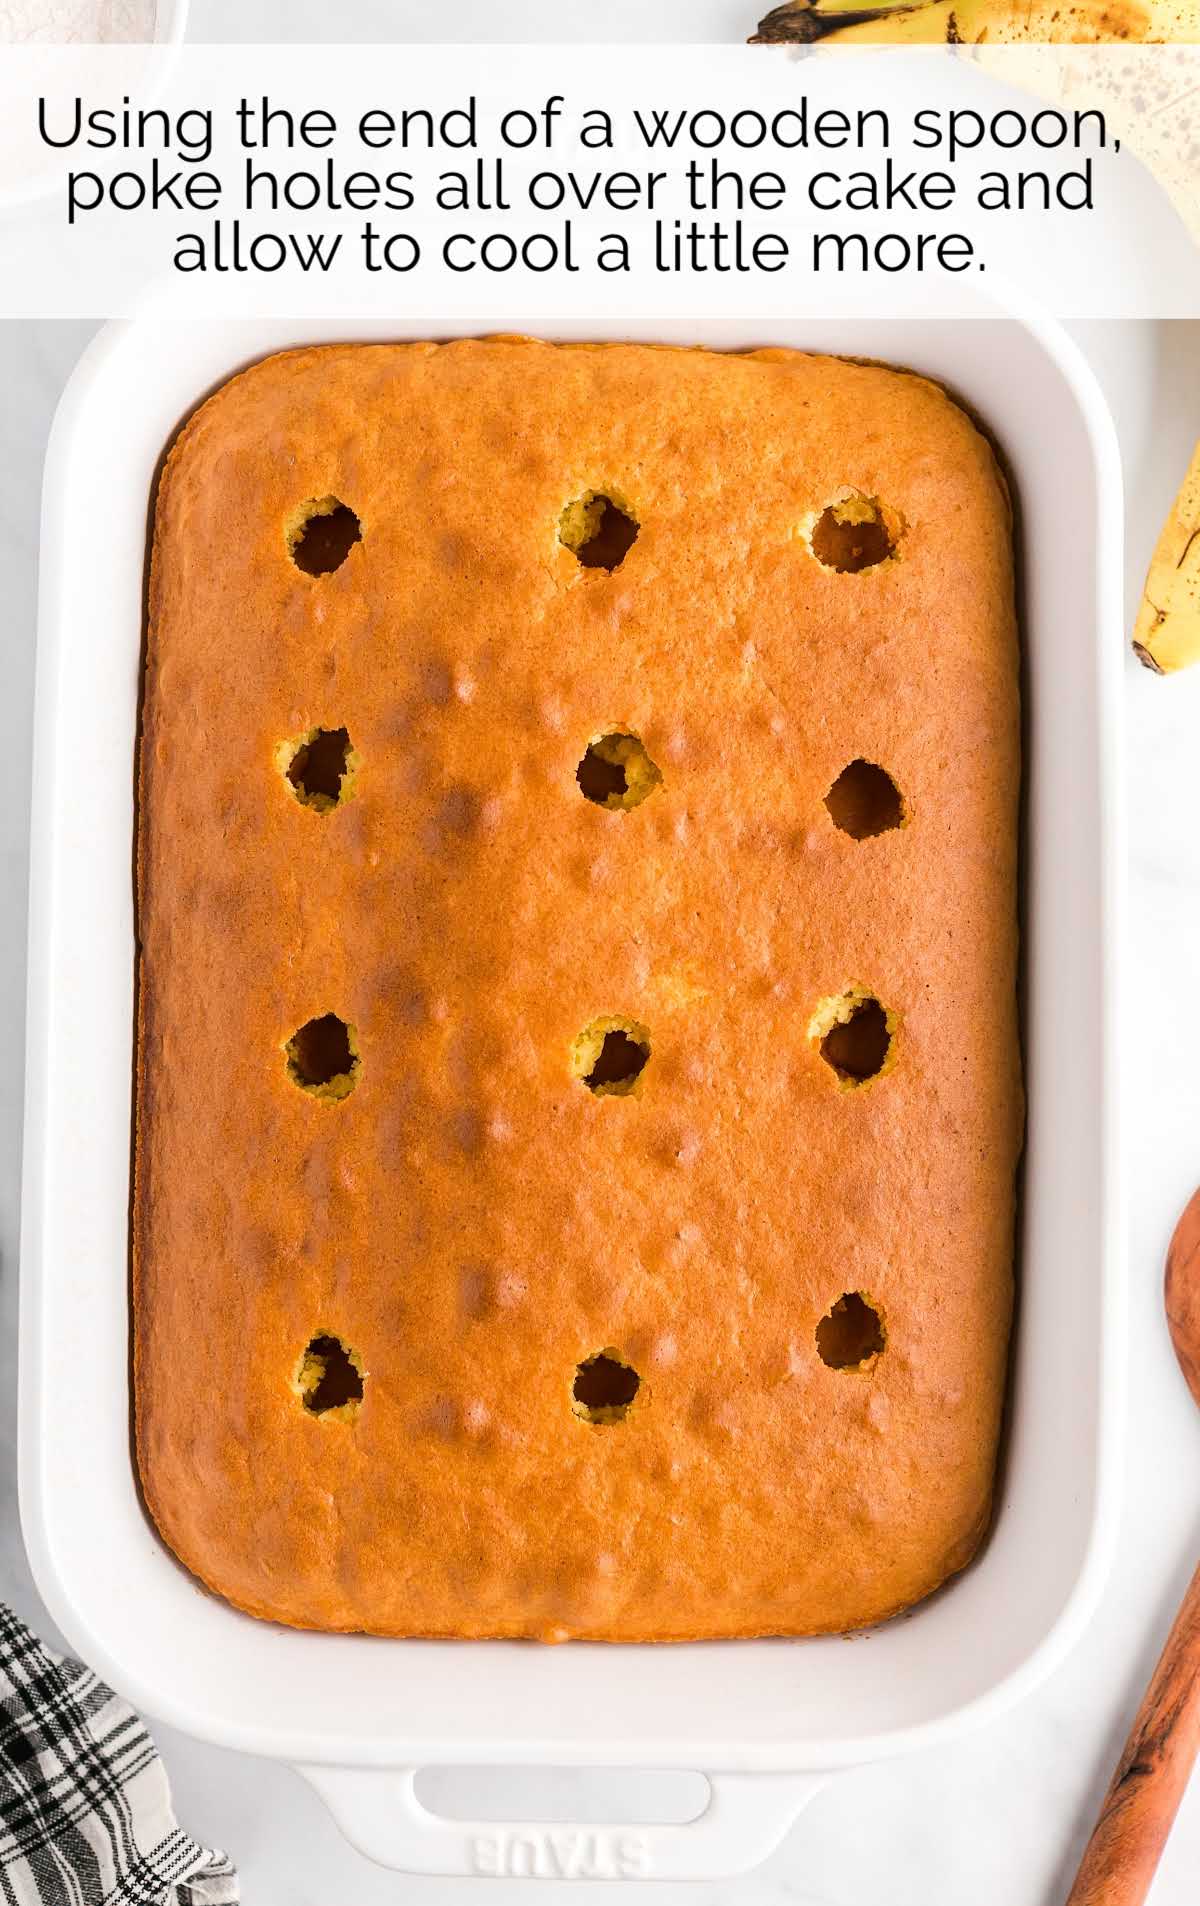 holes poked on the cake in a baking dish